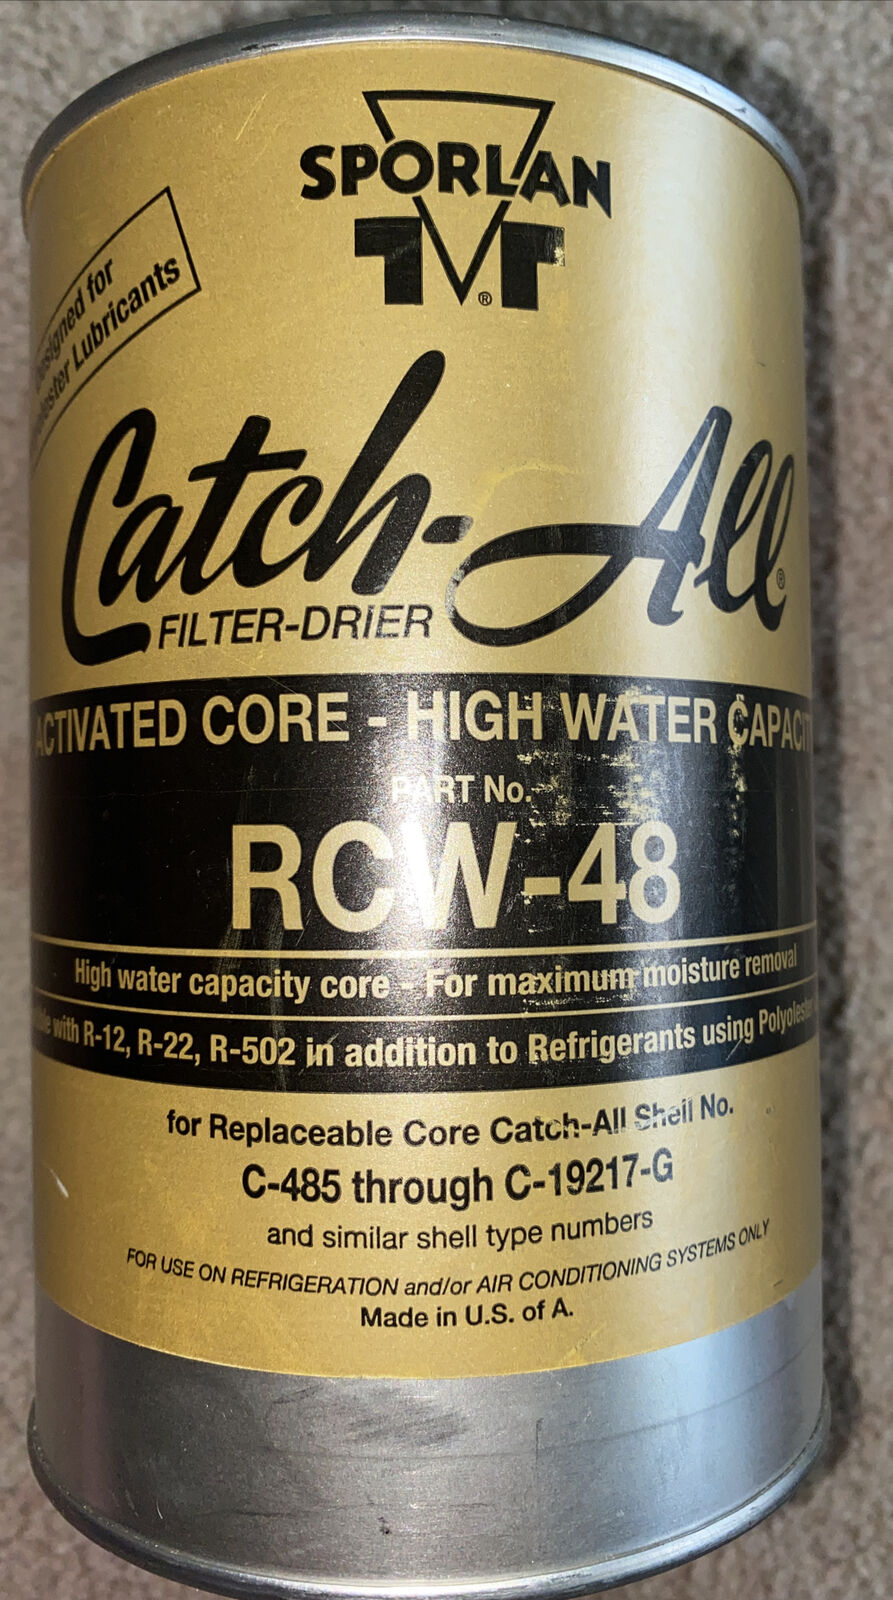 Sporlan RCW-48 / Activated Core / High Water Capacity / Catch All